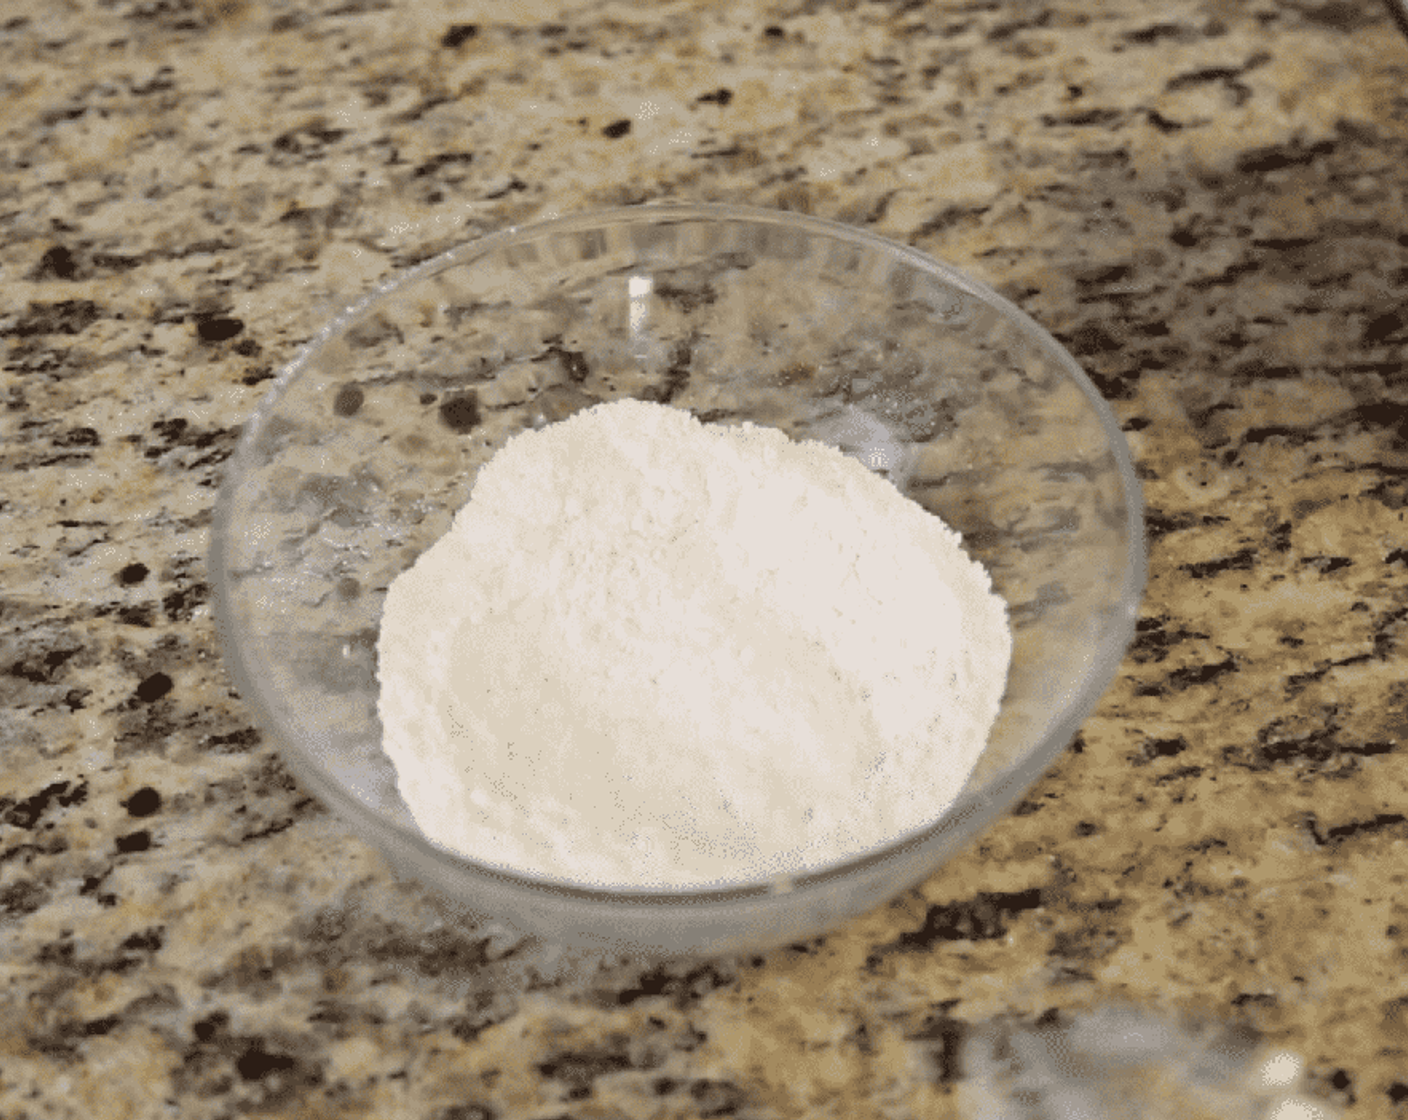 step 1 Batter: In a medium bowl, sift together the dry ingredients: whisk together All-Purpose Flour (1/2 cup), Cake Flour (1/2 cup), Baking Powder (1 Tbsp), Coarse Salt (1 tsp).